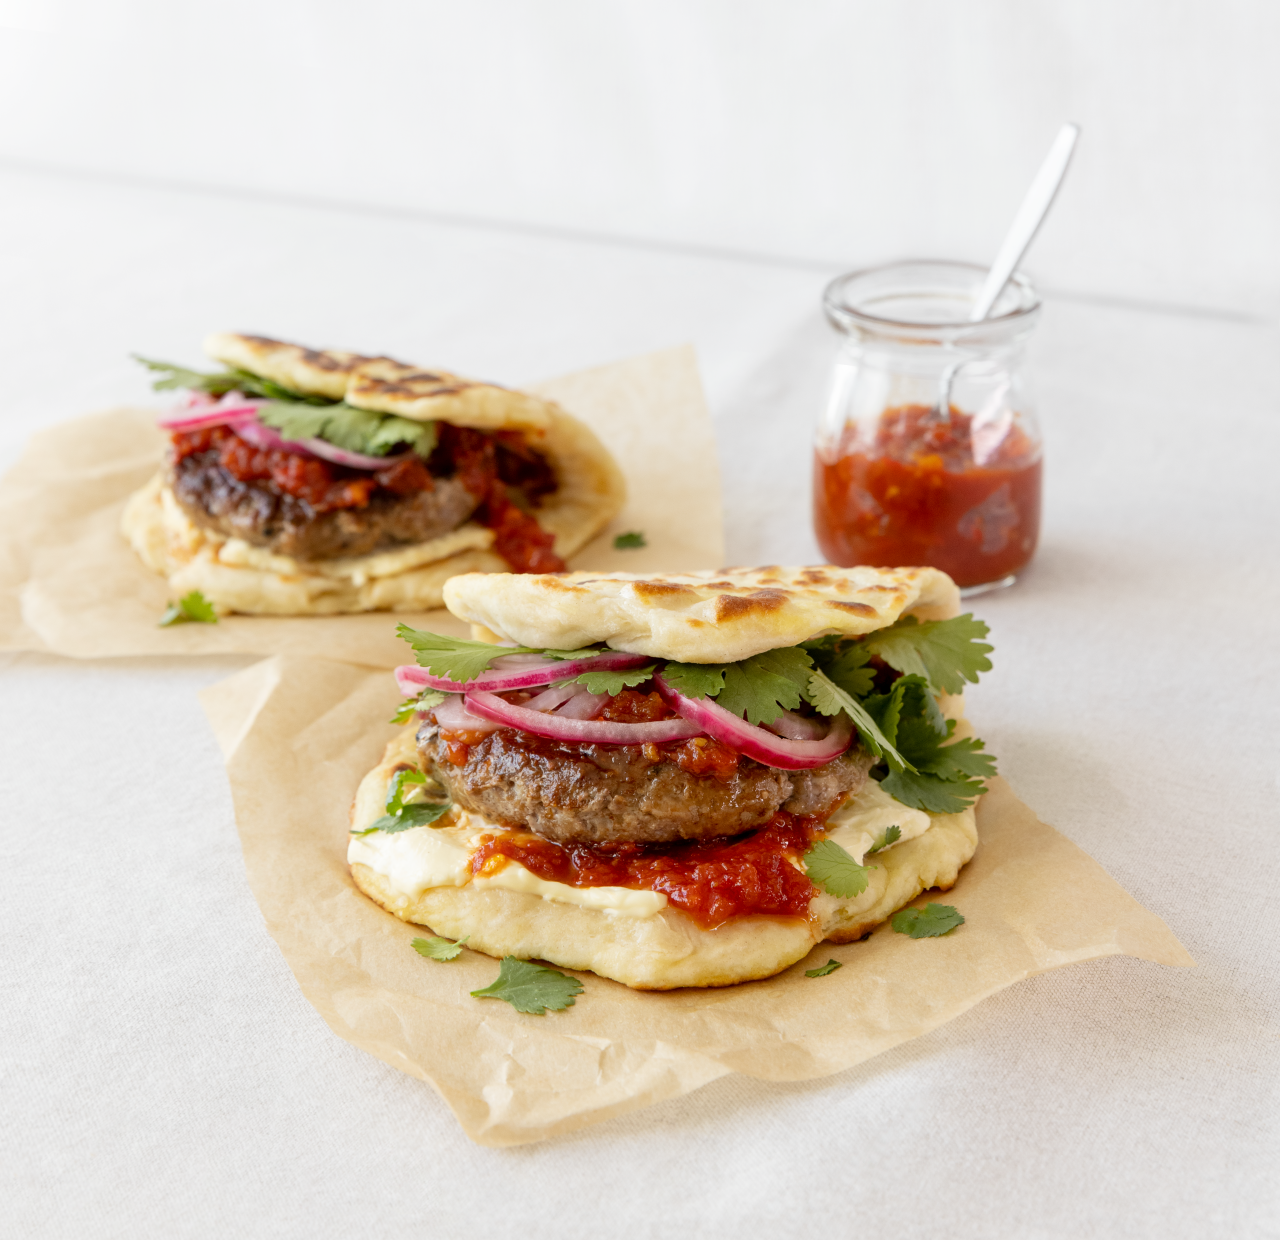 Indian Spiced Lamb Rump Burger with Naan on paper